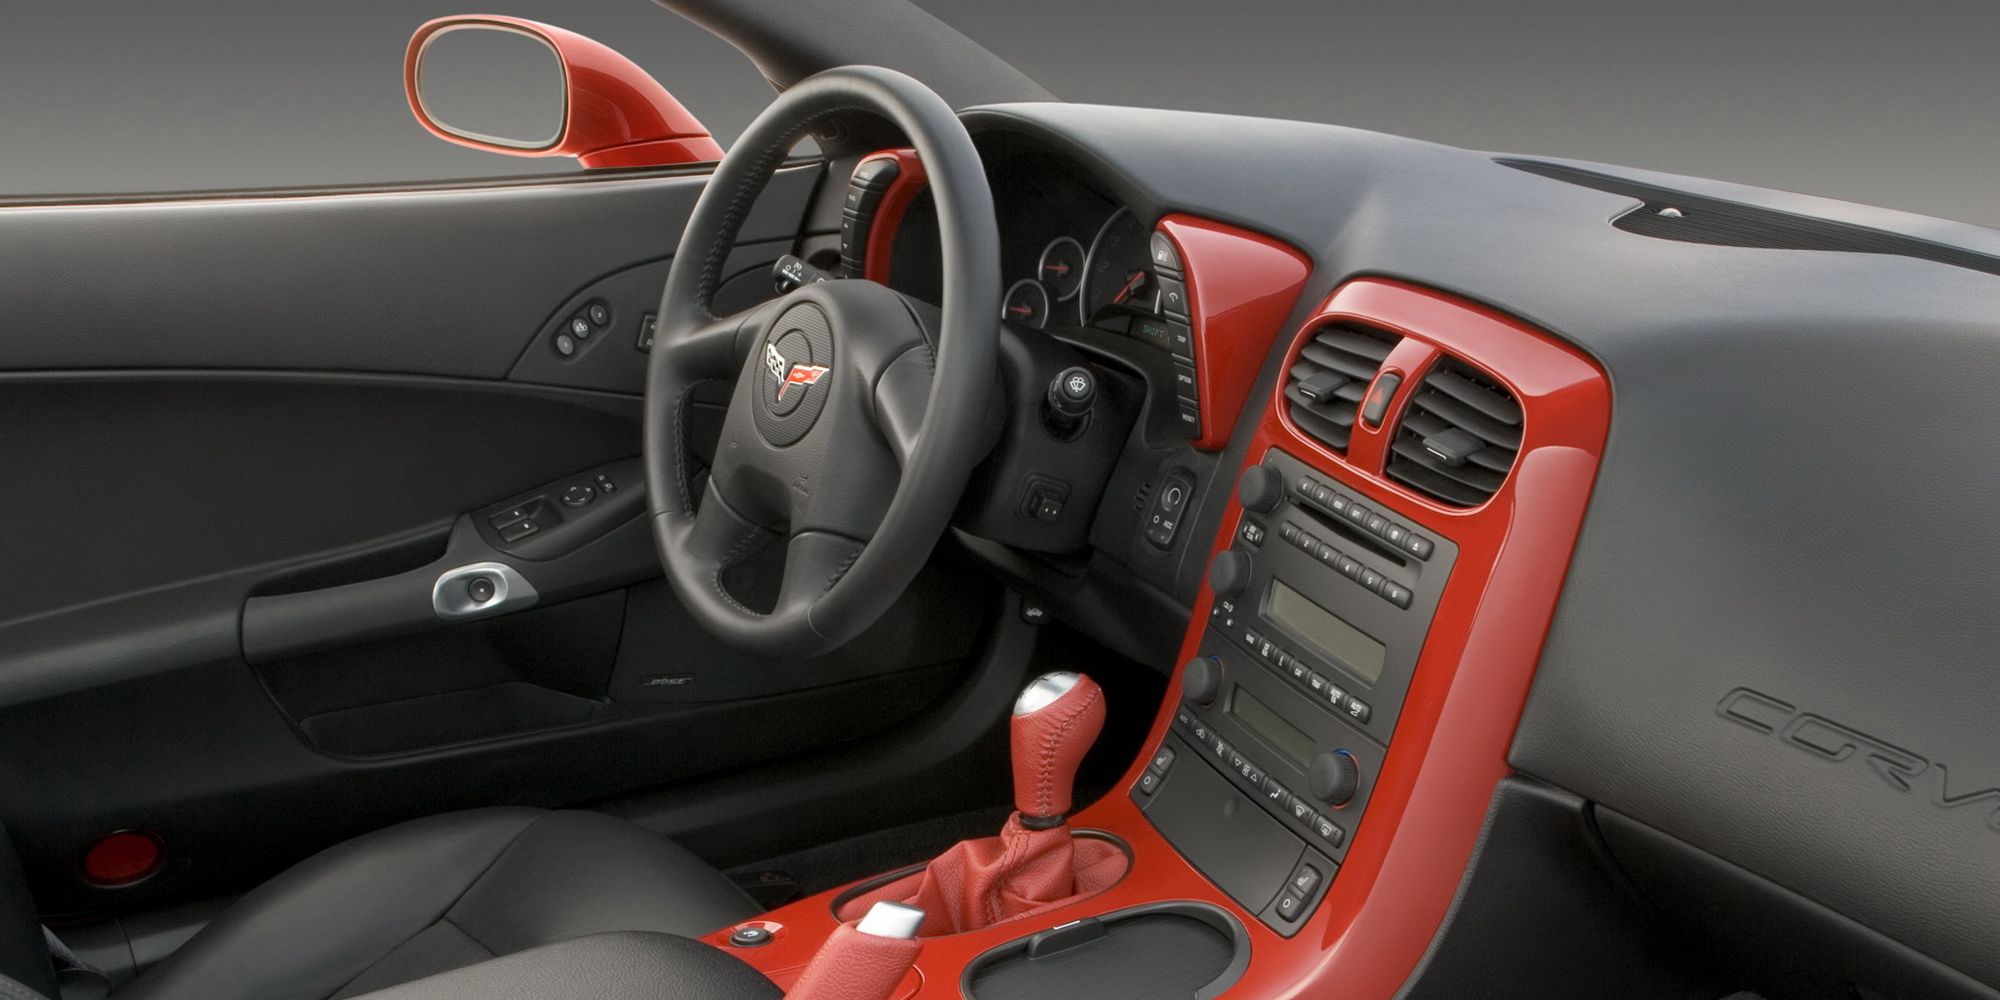 The interior of the C6 Corvette, from the passenger seat